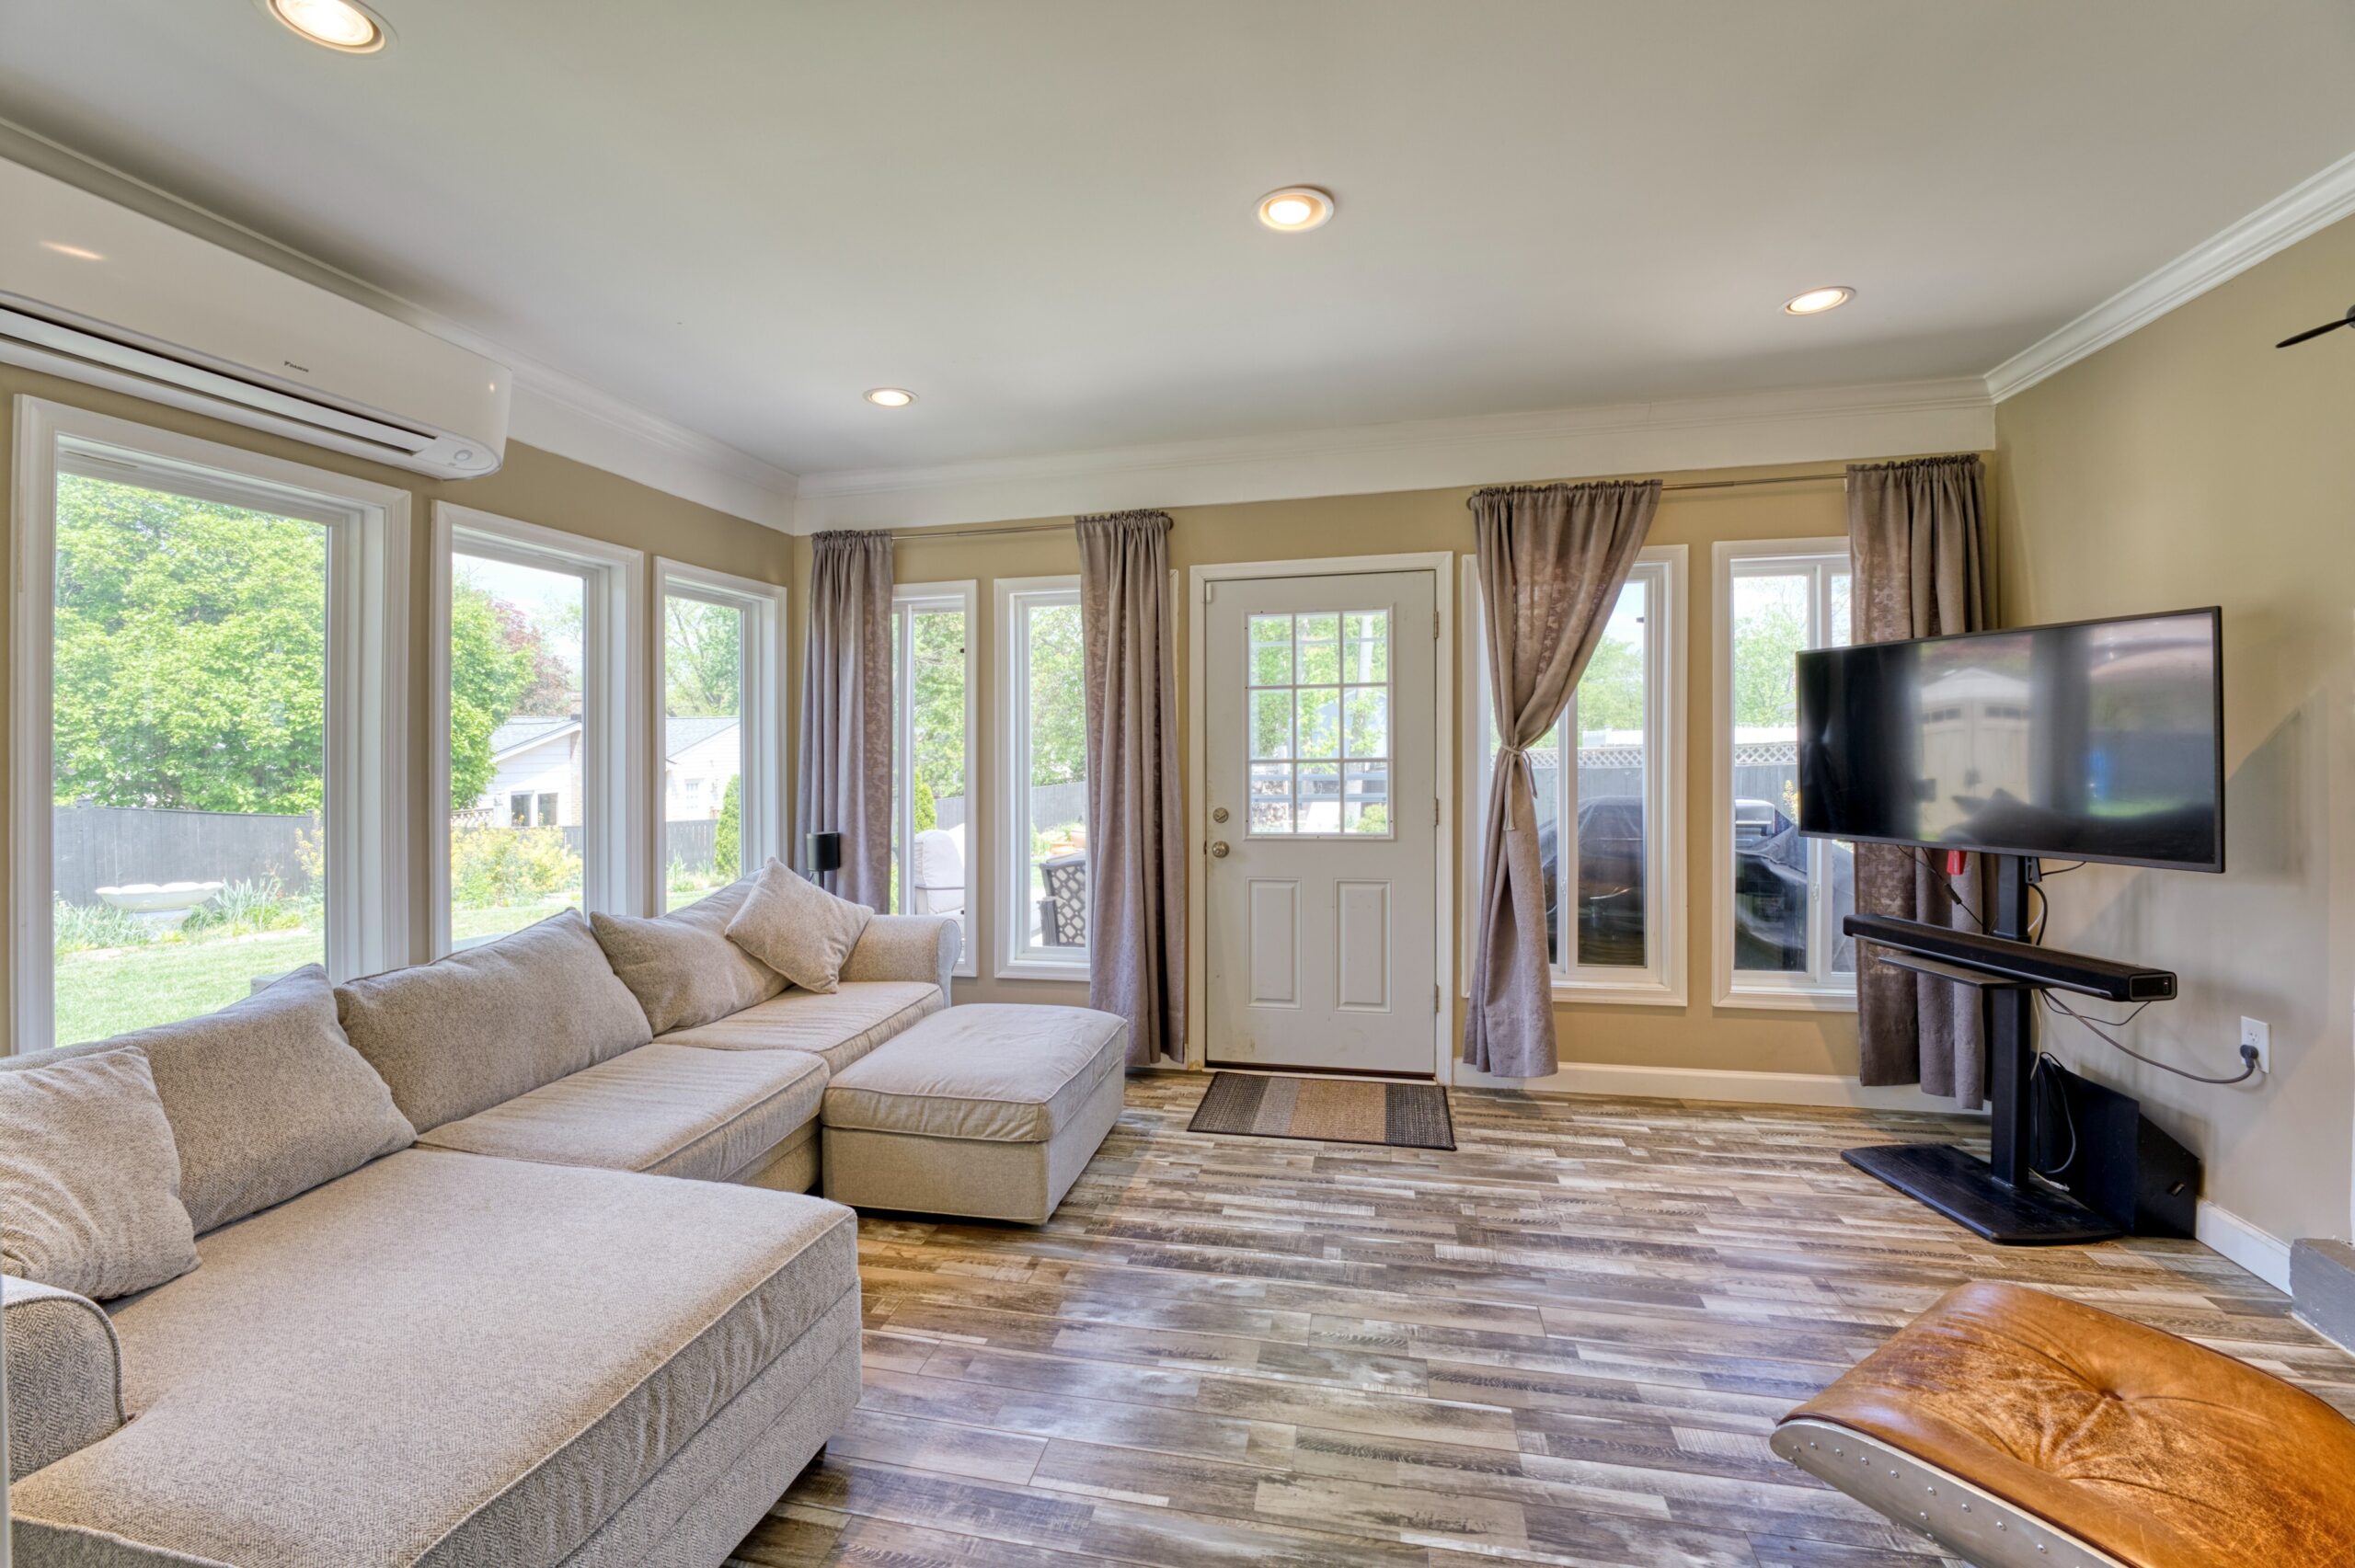 professional interior photo of 102 S Harrison Road, Sterling, VA - showing the rear living/sun room with LVP and a sectional couch facing a widescreen TV